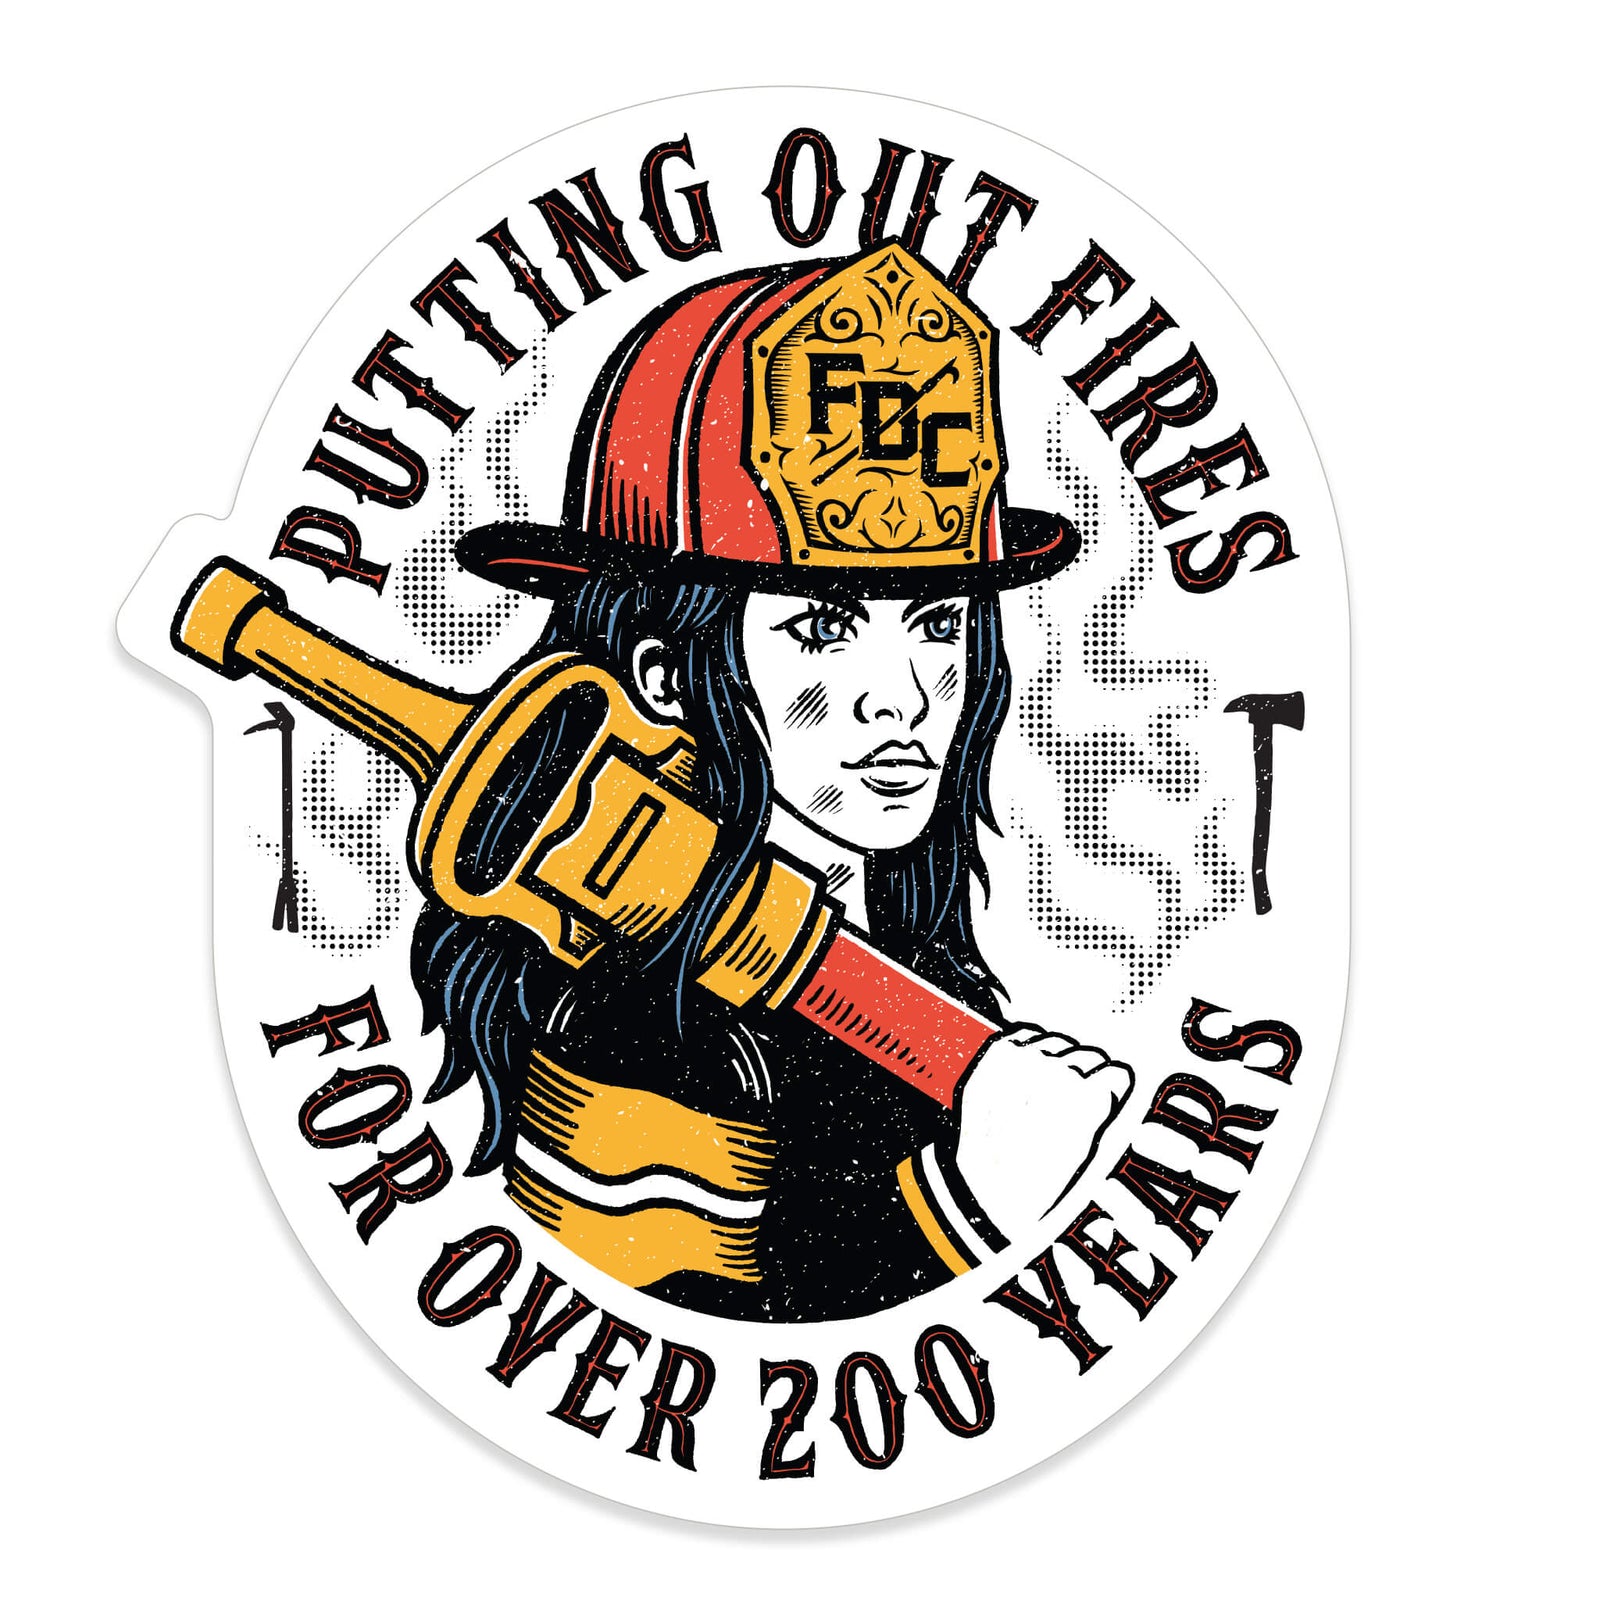 A sticker with an image of a female firefighter and text around her that reads "putting out fires for over 200 years". 